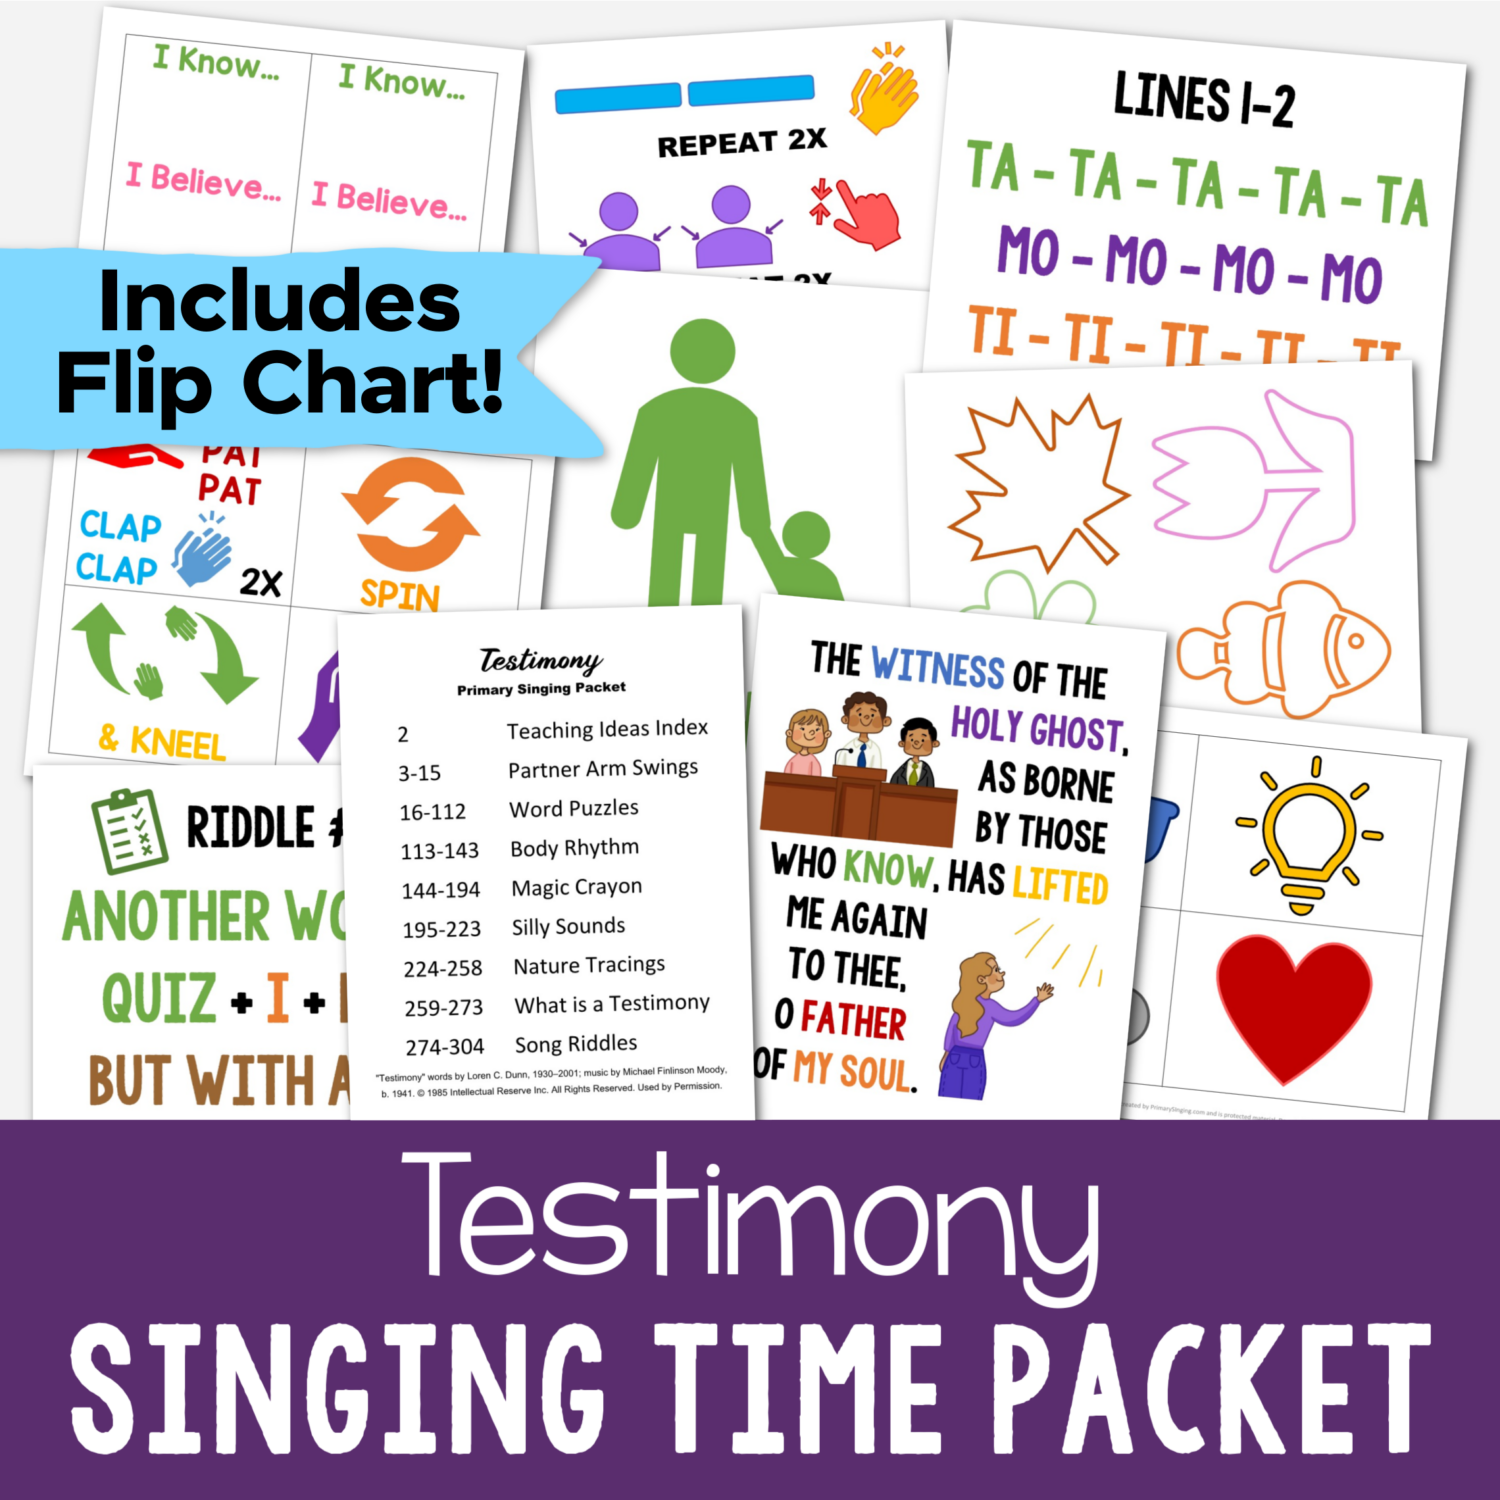 Testimony Singing time packet for this great LDS hymn - easy ways for Primary music leaders to teach this song including a beautiful custom art flip chart, song riddles, missing words, magic crayon, nature tracings, what is a testimony and more!